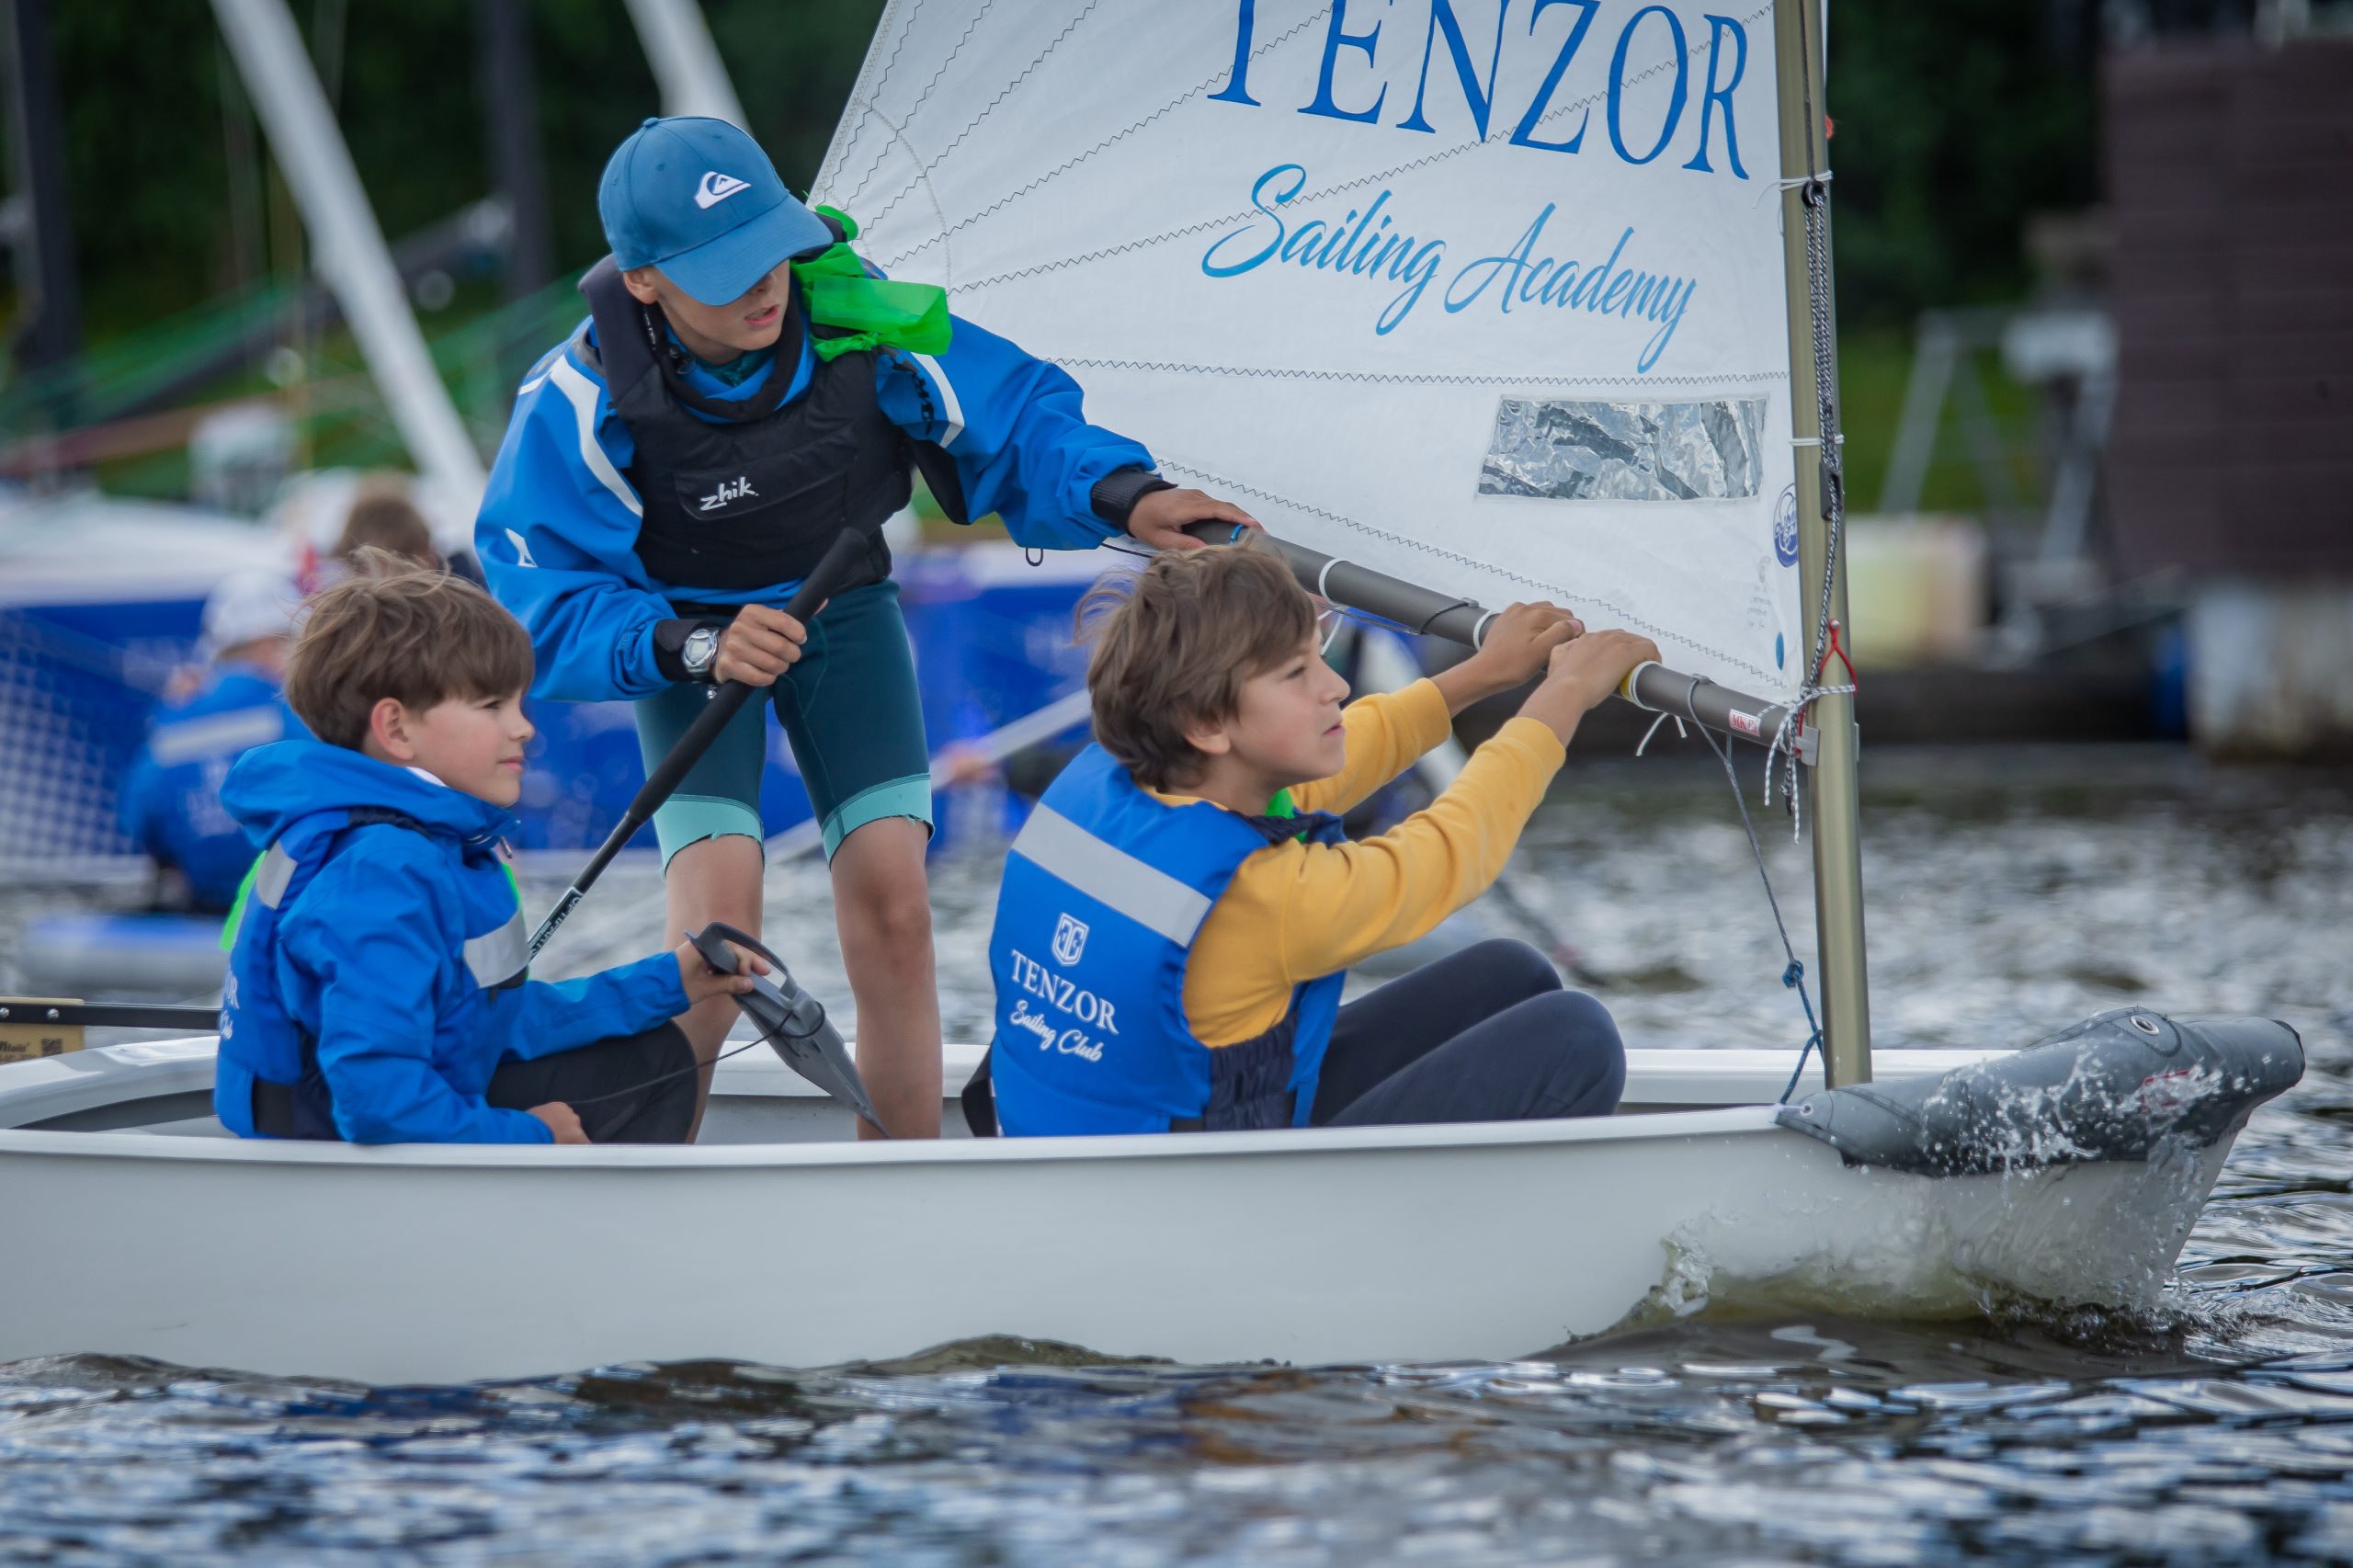 Tenzor Sailing Academy in Dubna – new spot on the sailing map!